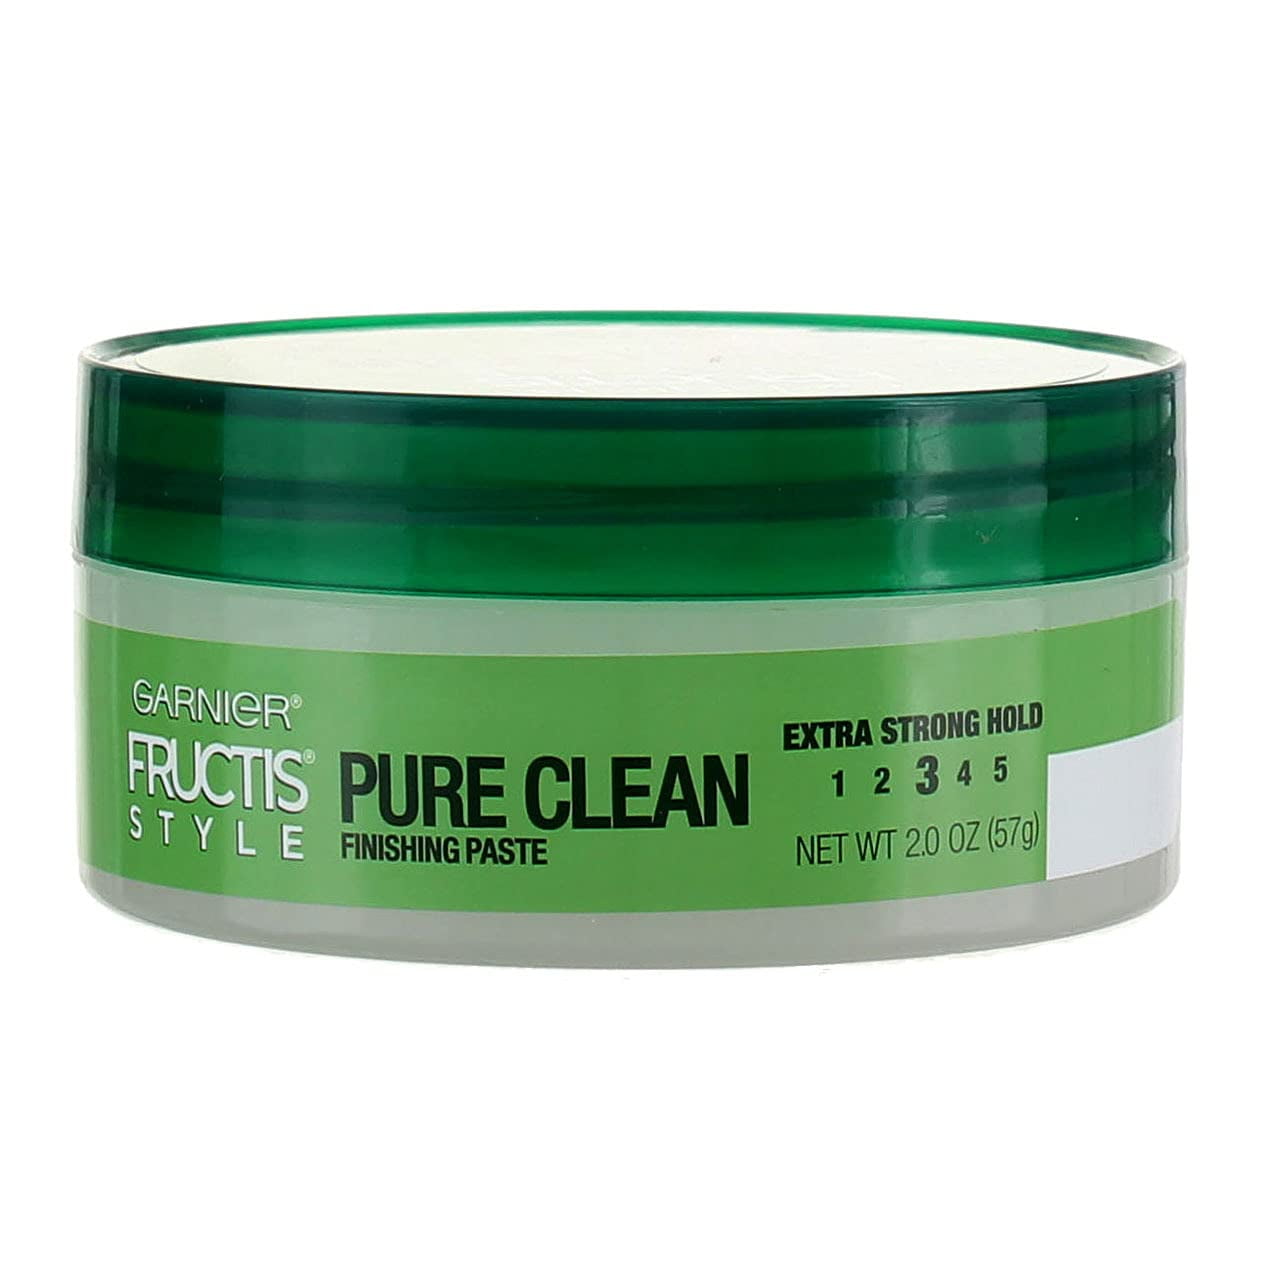 Fructis Style Pure Clean Finishing Paste, 2.0 (Pack of 3) - Walmart.com